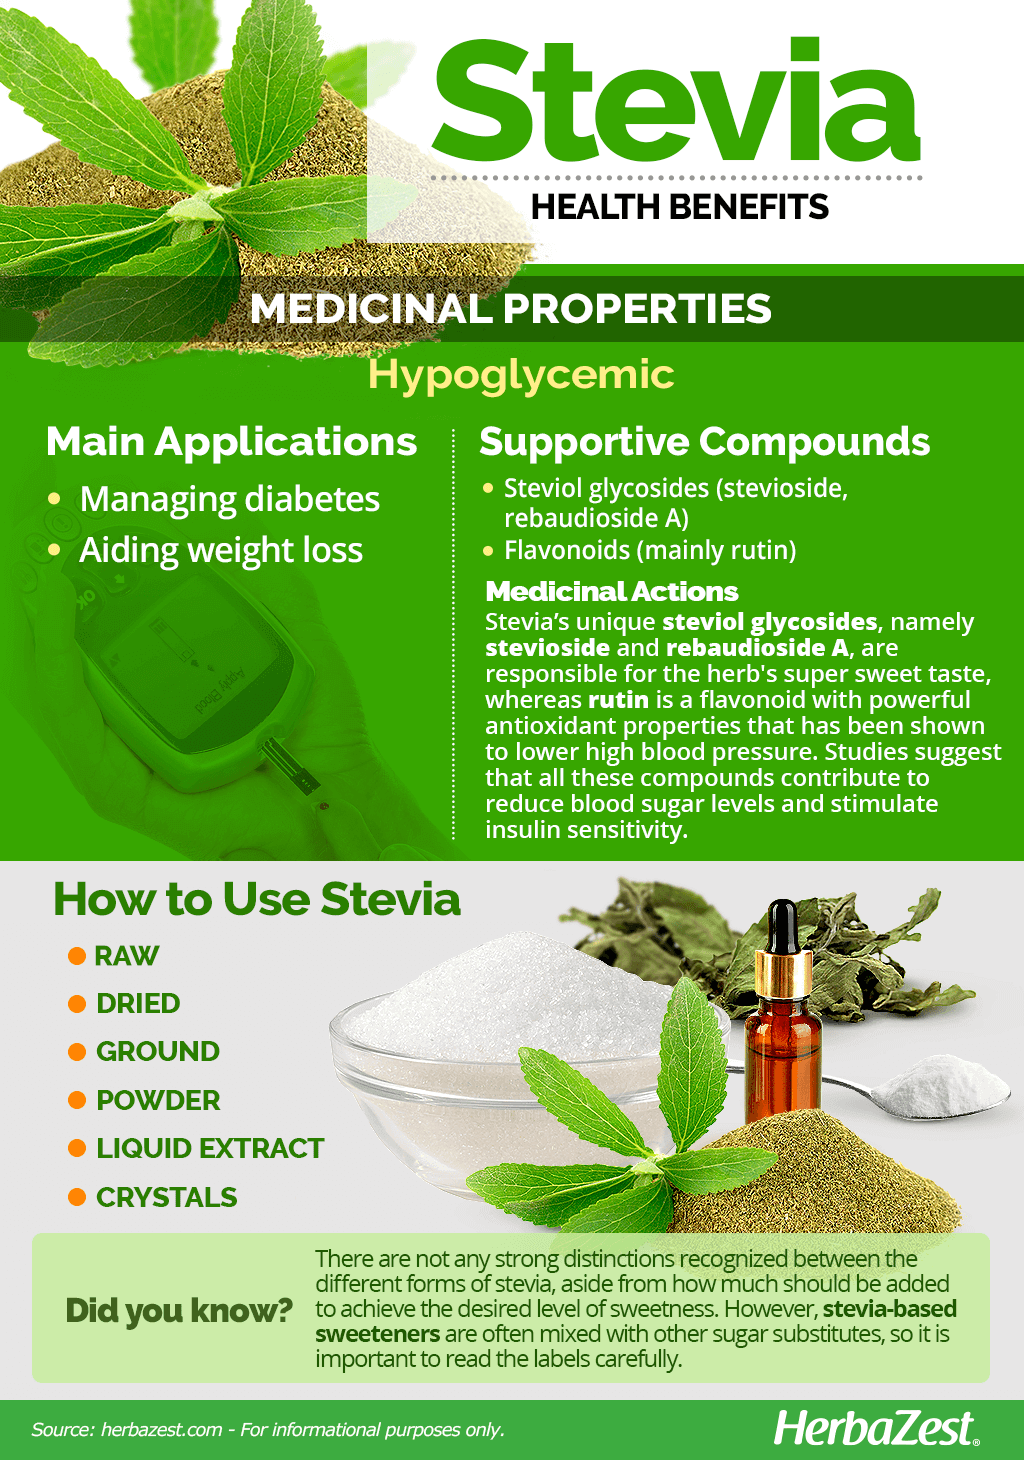 All About Stevia